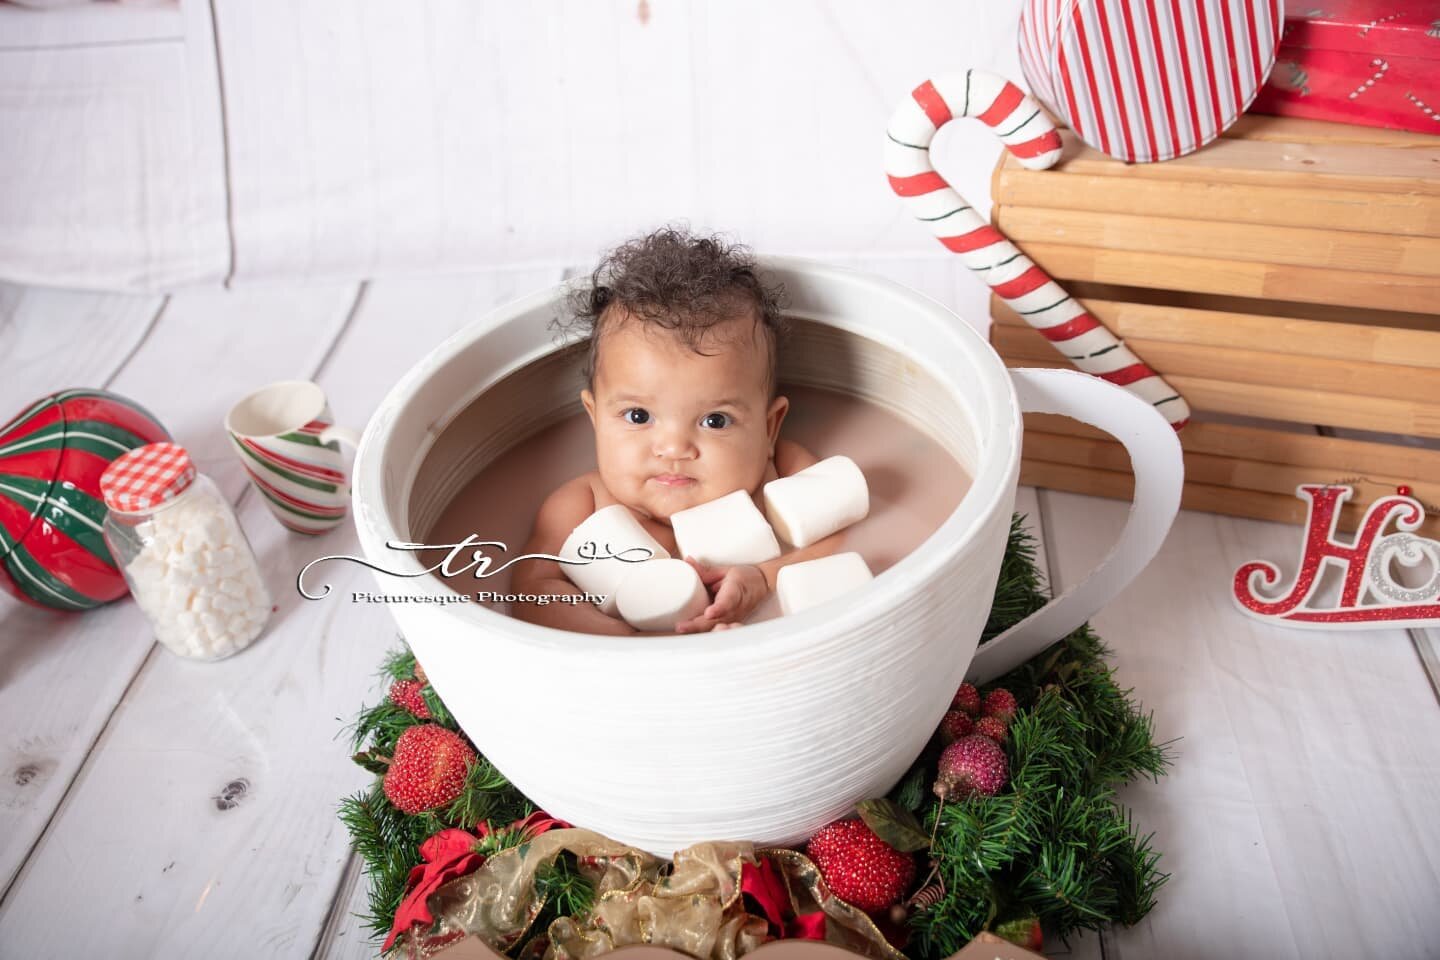 Hot Cocoa Sessions 
.
#trpicturesque #hotchocolate #hotcocoa #christmasphotos #sittersession #6months #adorable #santababy #marshmallow #candycane #baby #babyinacup #chunkybaby #winter #happiness